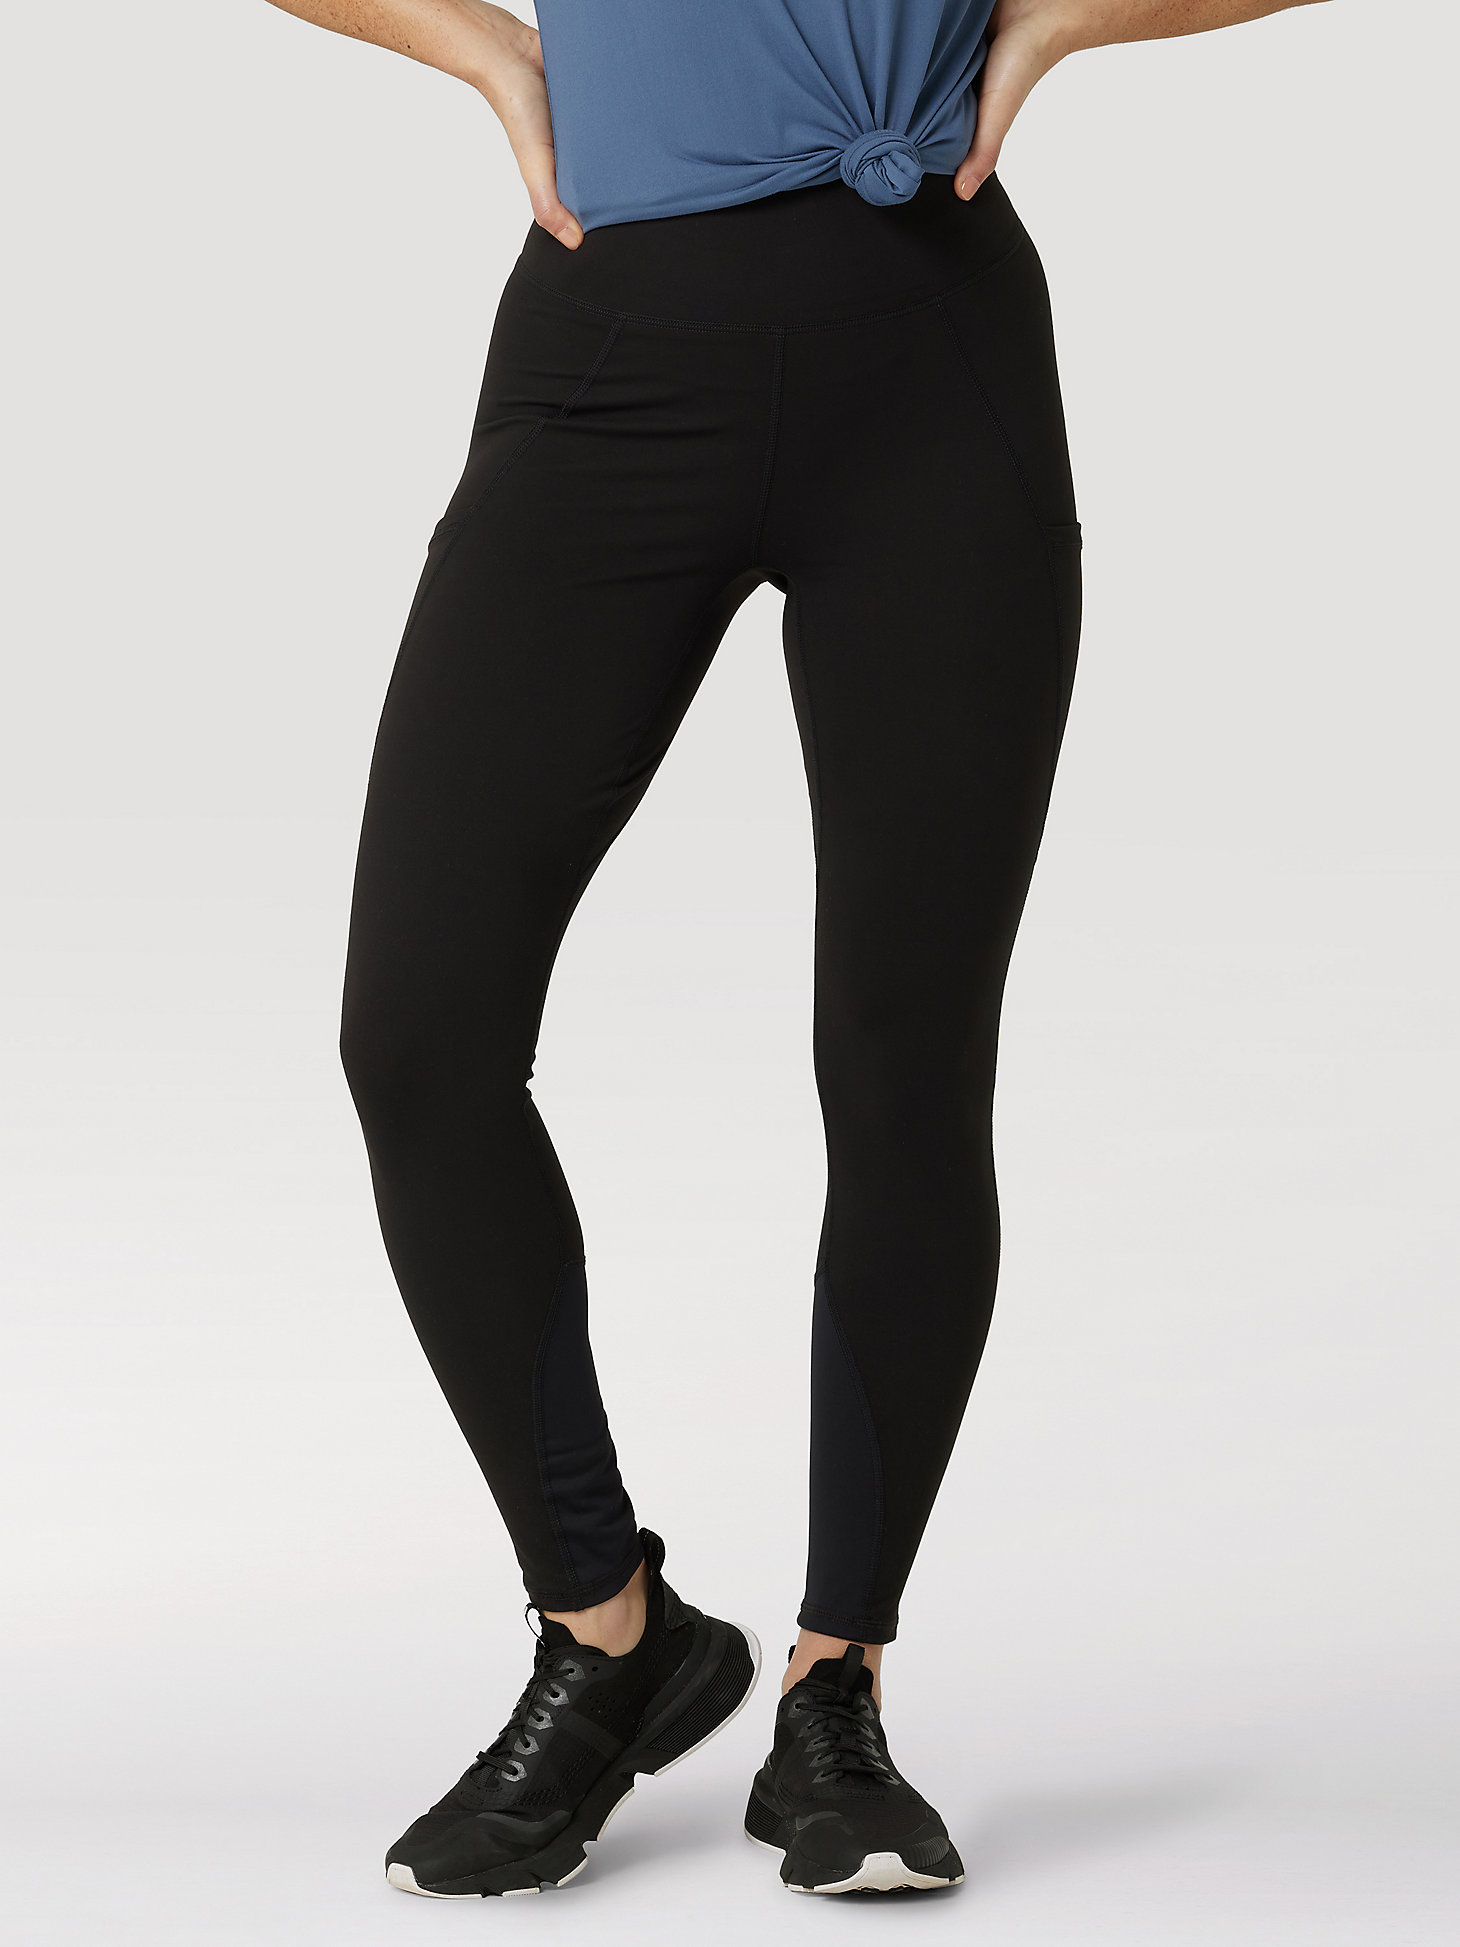 ATG By Wrangler™ Women's Compression Leggings in Black main view